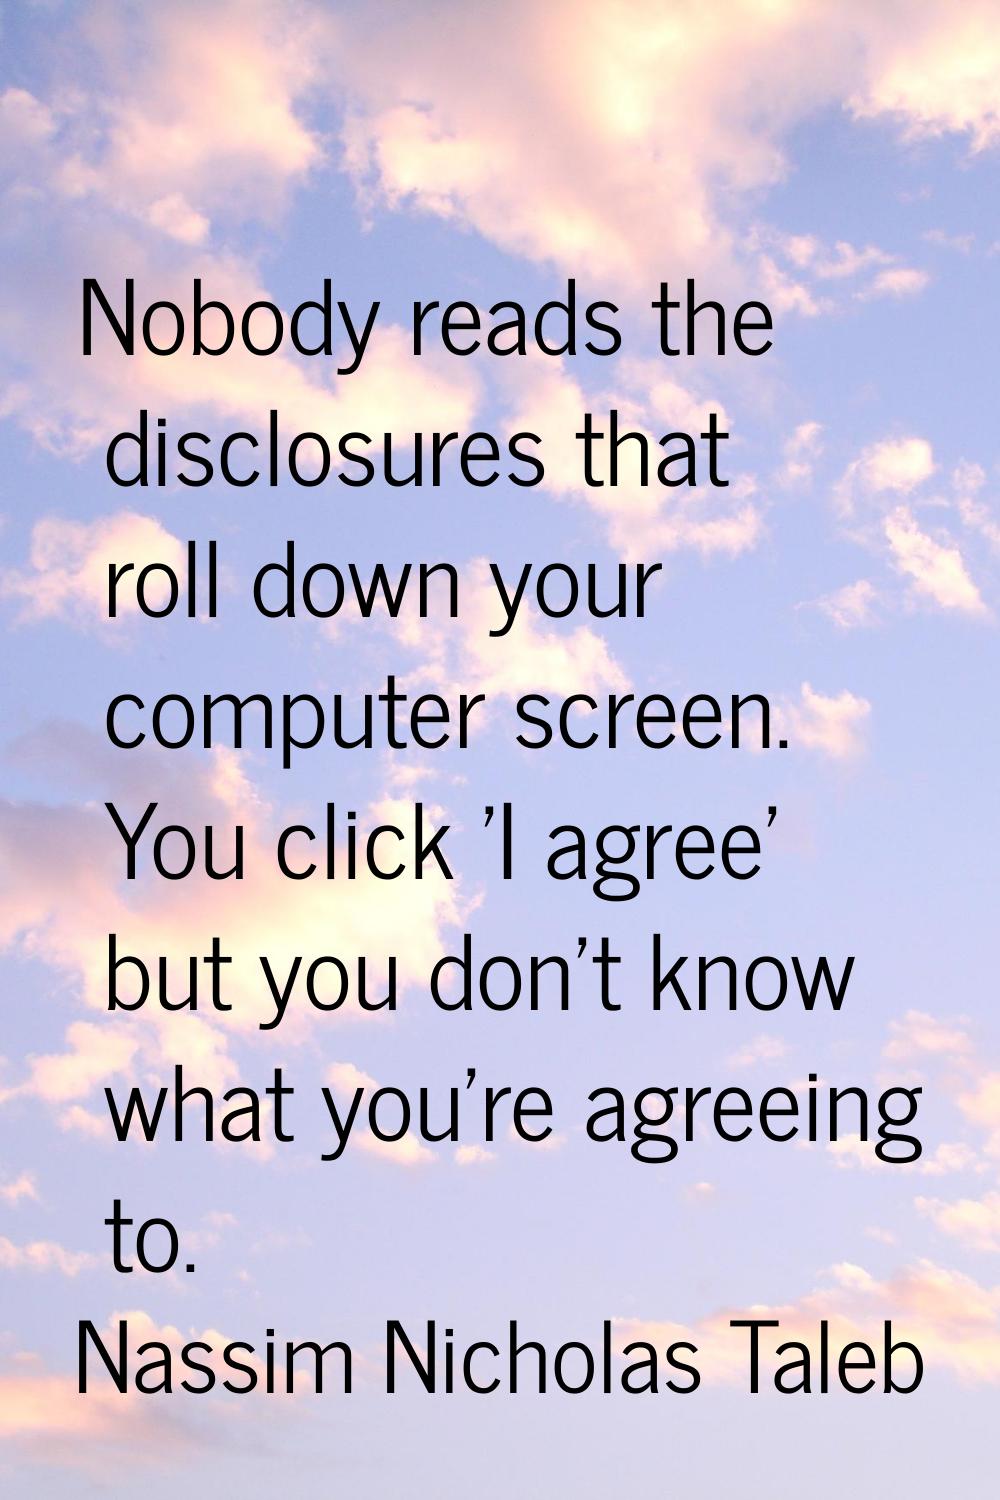 Nobody reads the disclosures that roll down your computer screen. You click 'I agree' but you don't